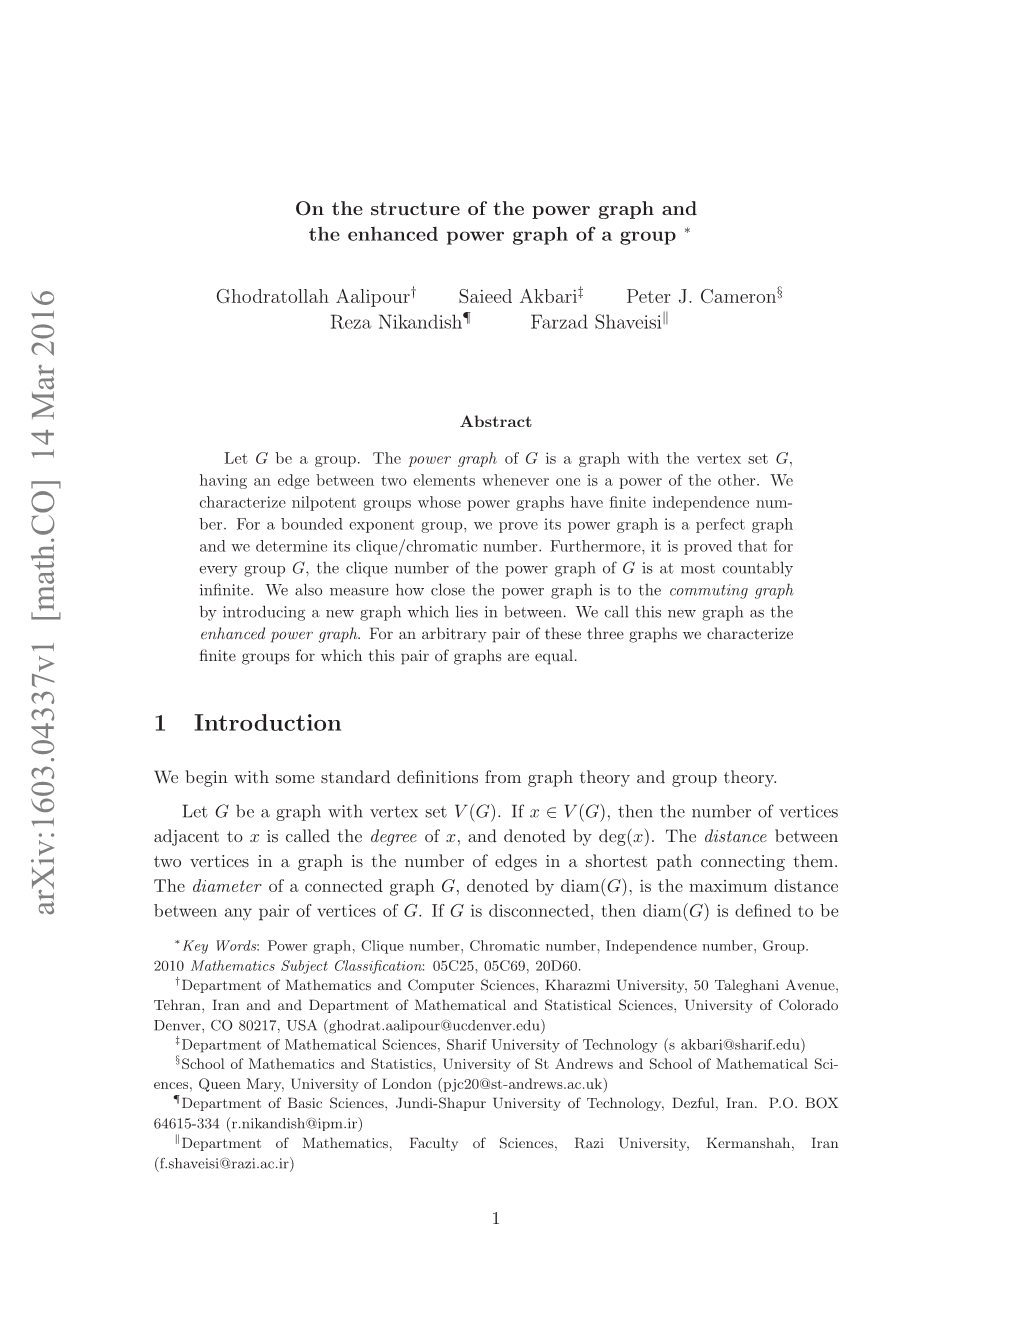 On the Structure of the Power Graph and the Enhanced Power Graph of a Group